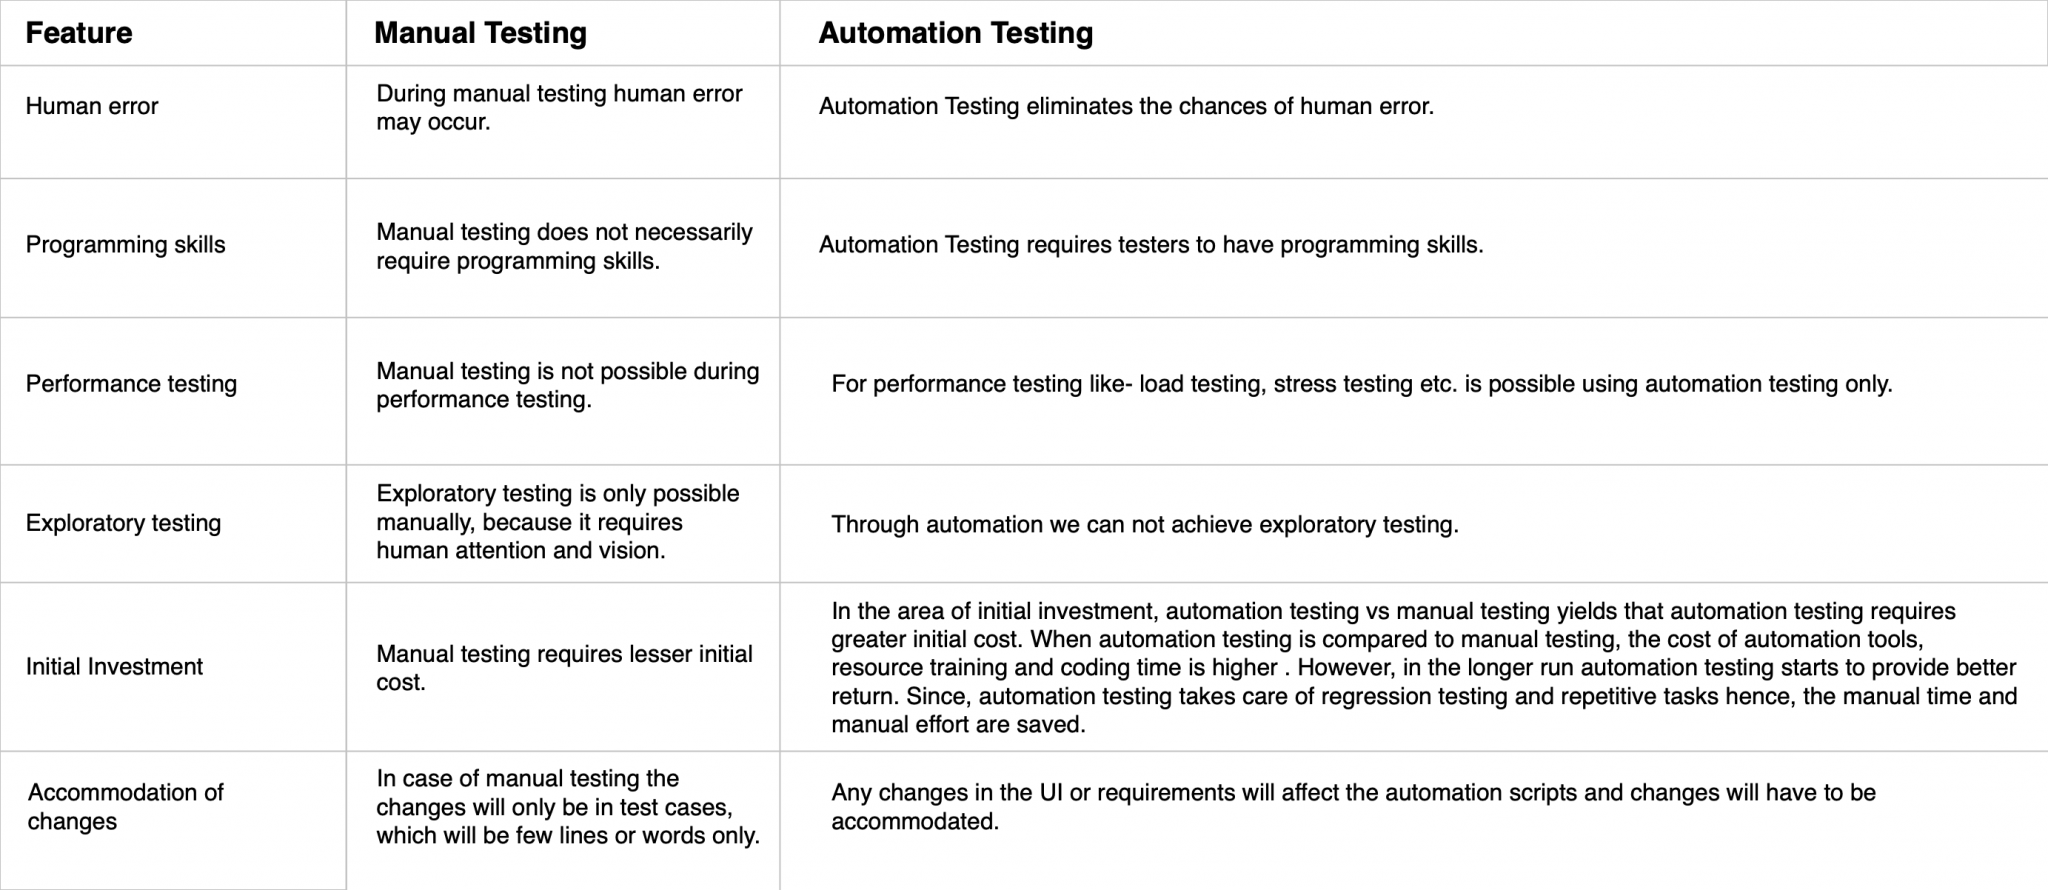 Differences Between Manual Testing and Automation Testing